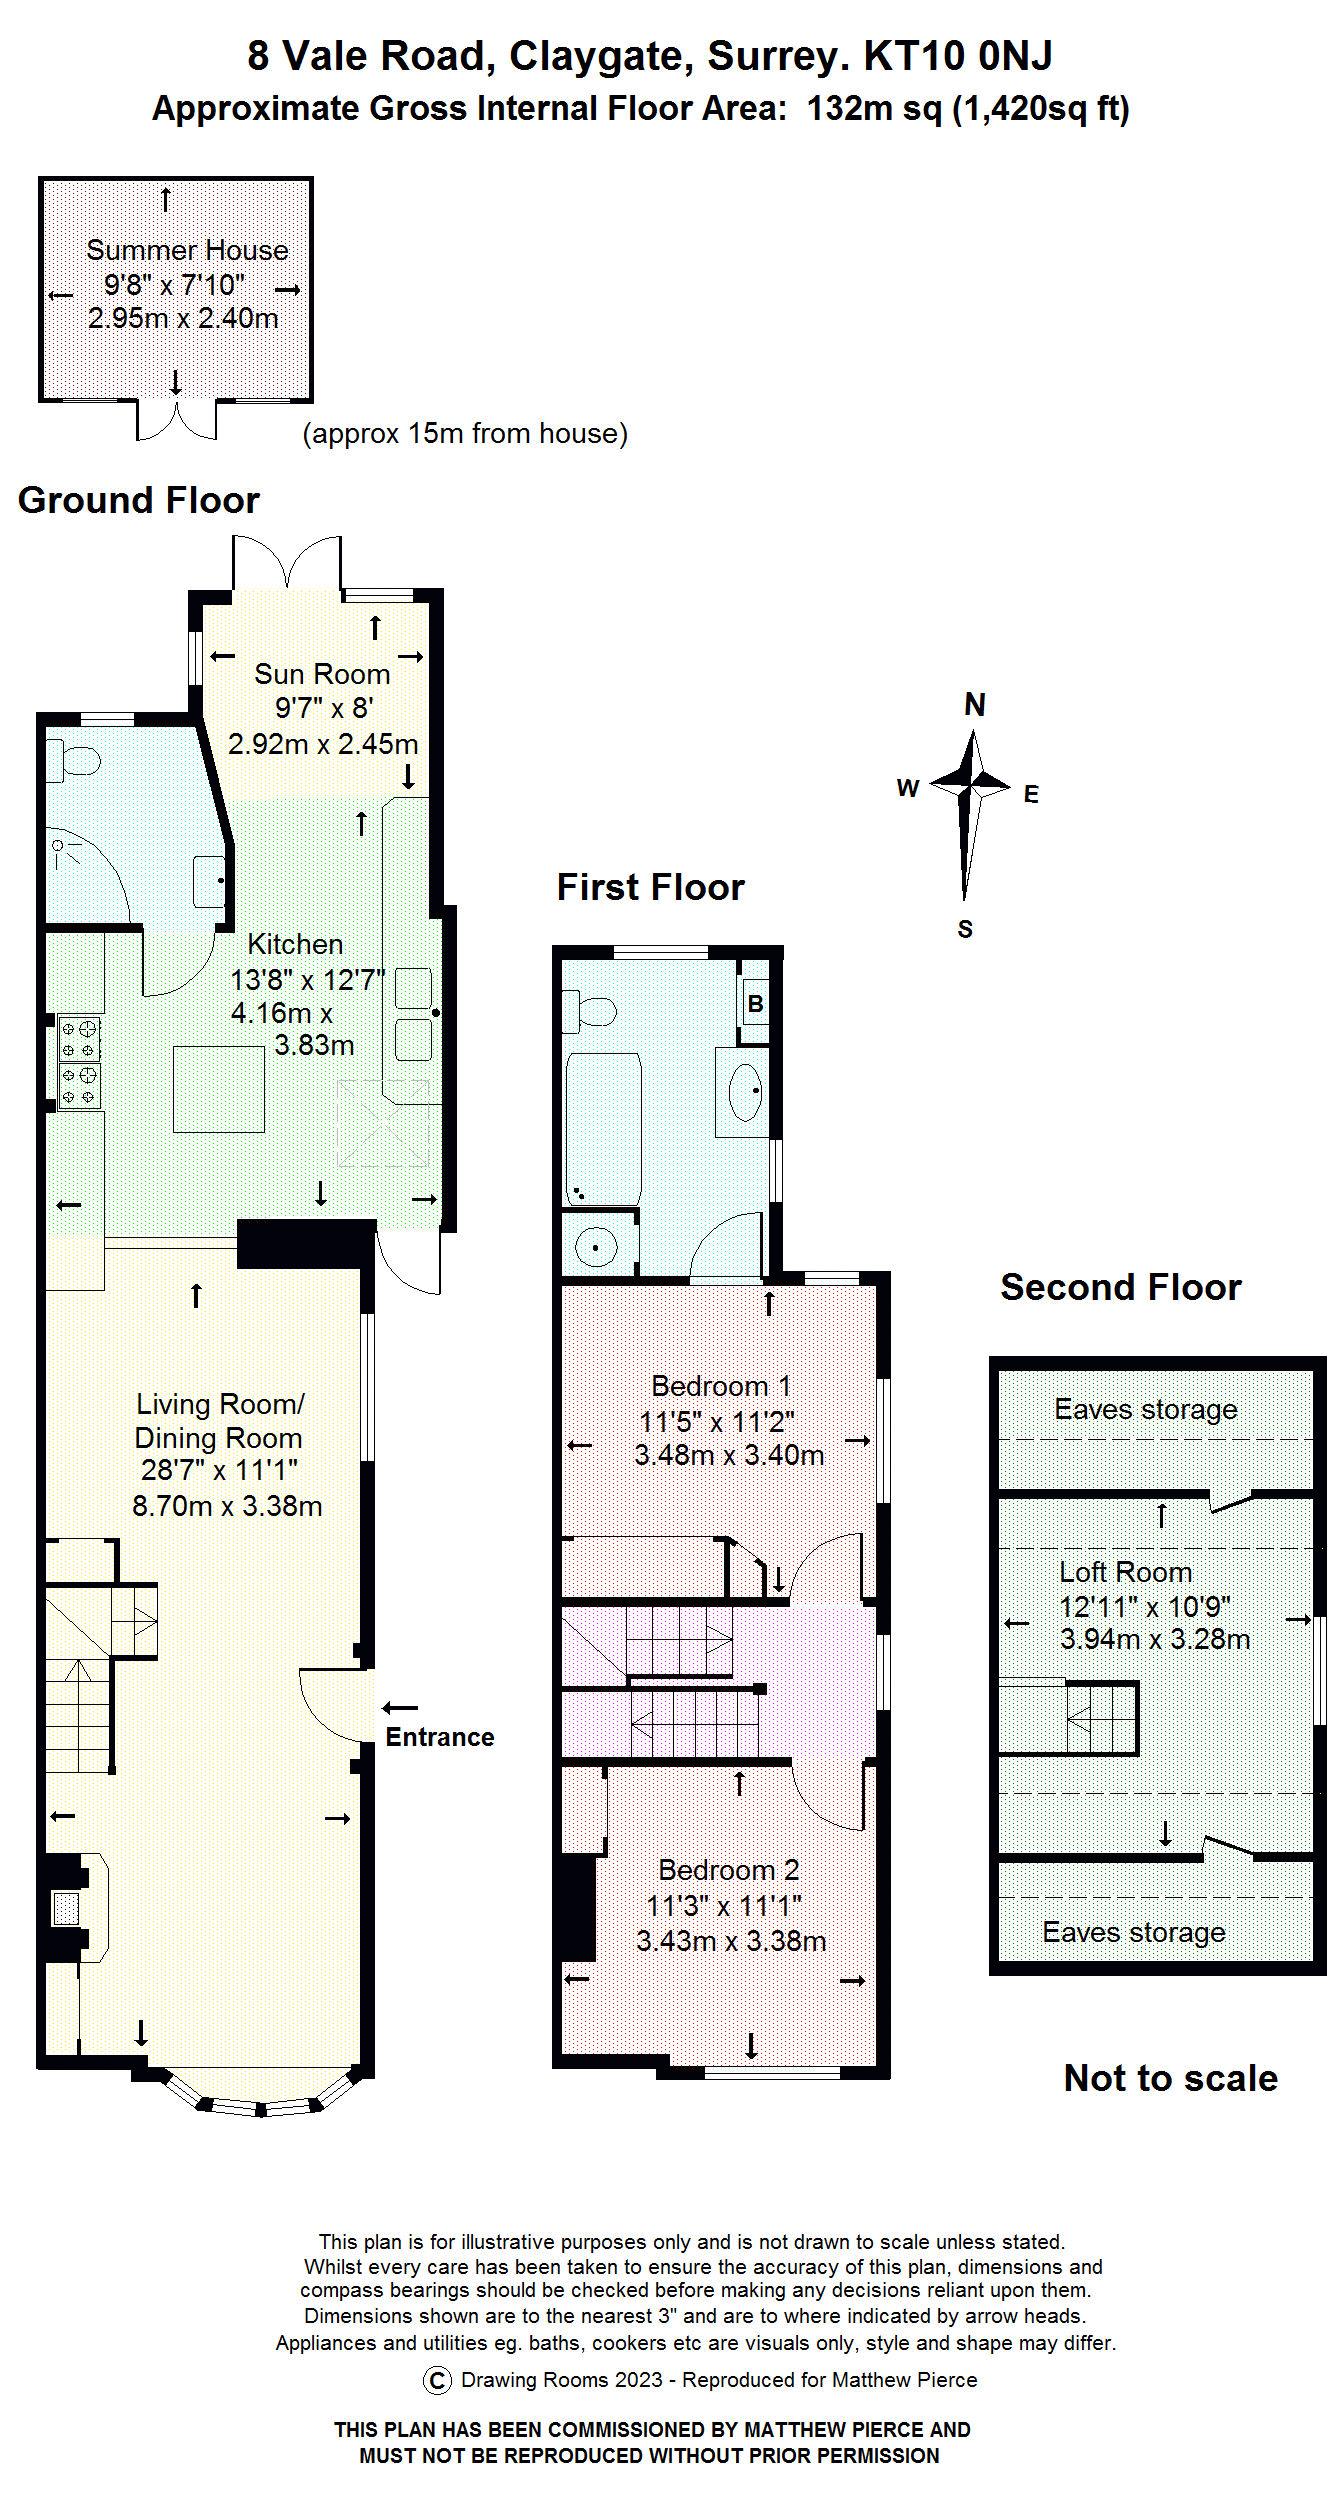 Floorplans For Vale Road, Claygate